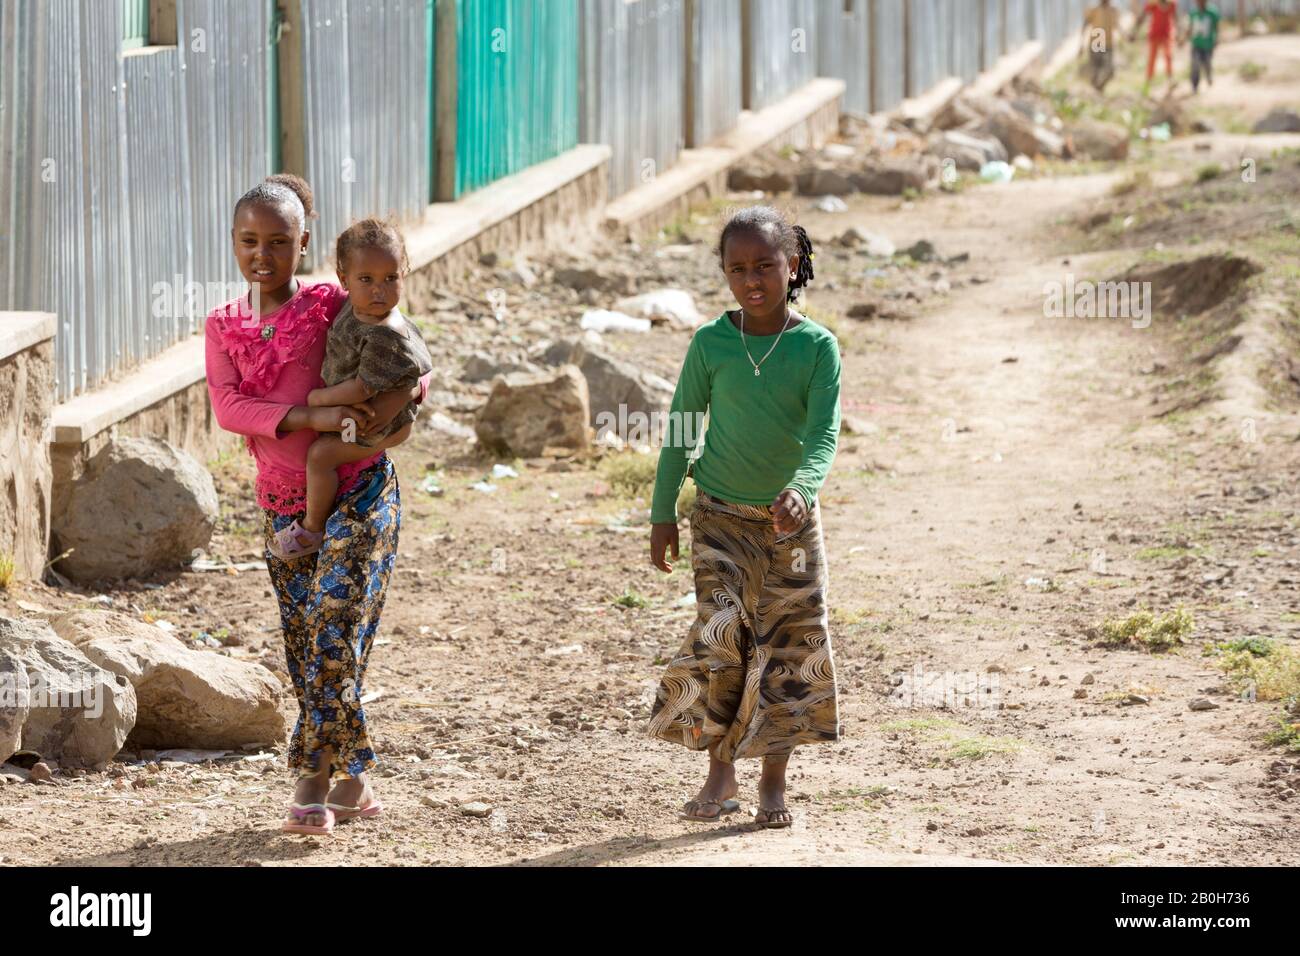 02.11.2019, Adama, Oromiyaa, Ethiopia - 8000 IDPs from the Somalia region live and reside in four refugee camps on the outskirts of the city. Children Stock Photo